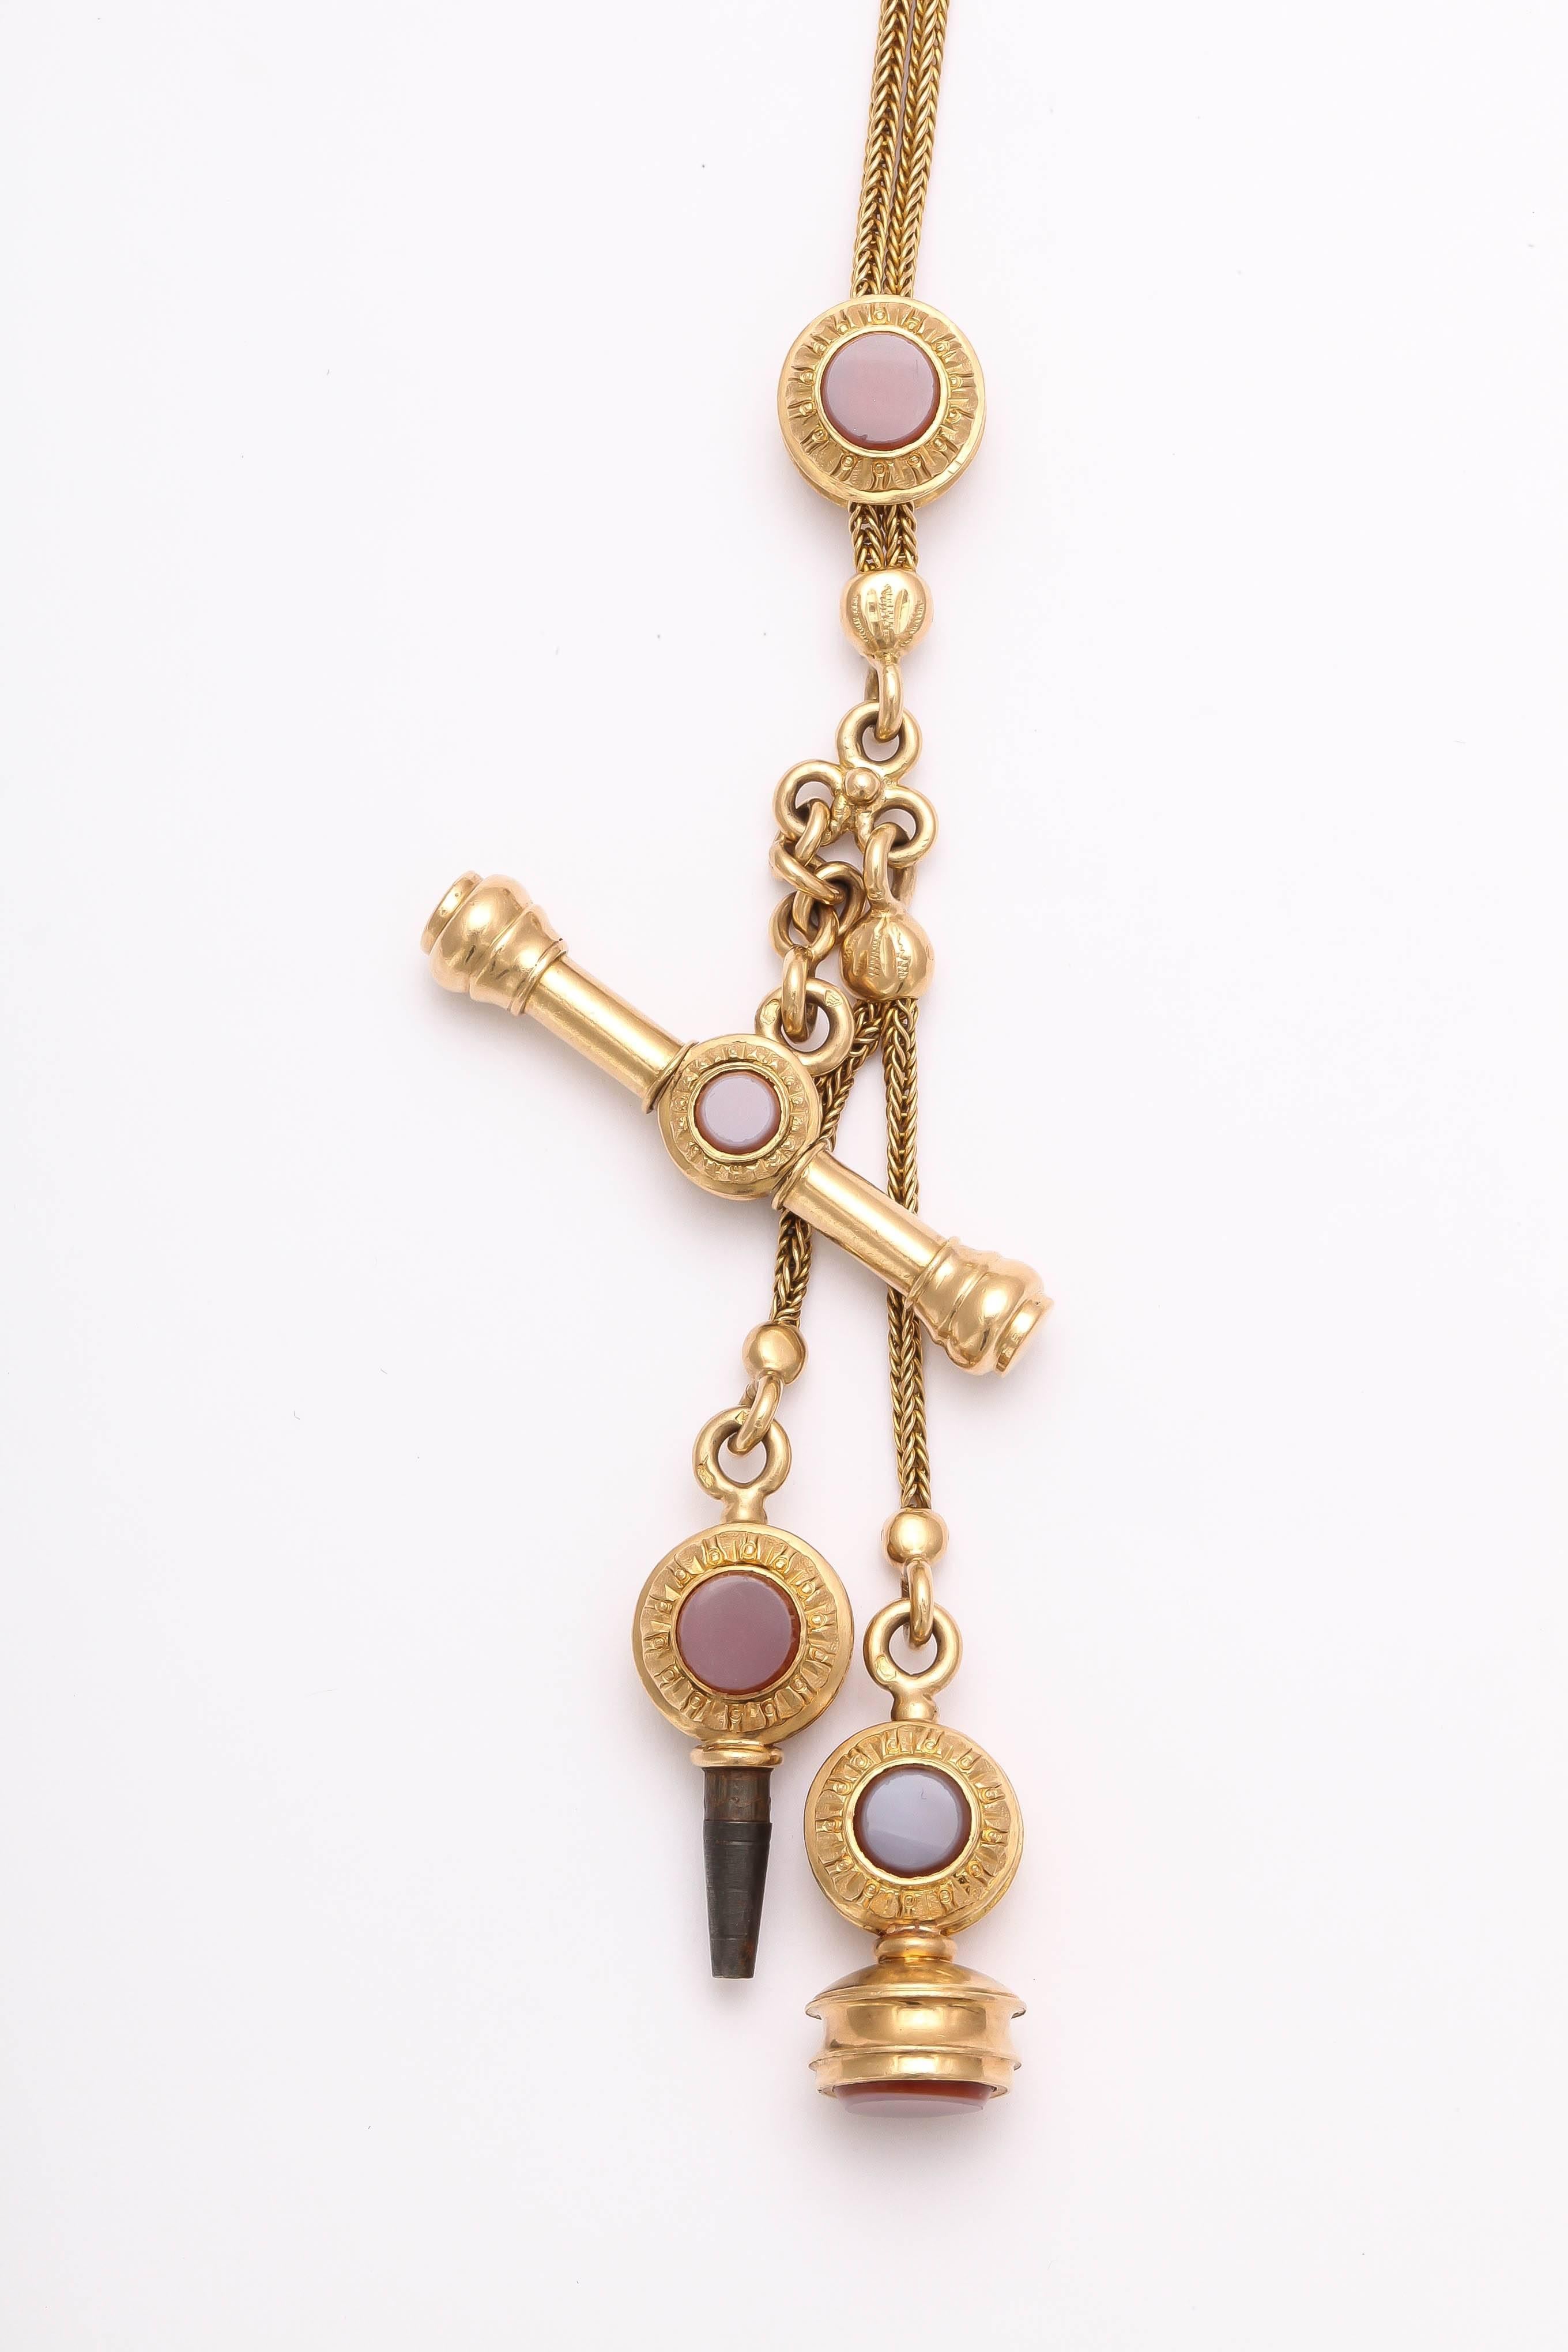 An unusual 18kt chain holding a toggle, fob, watch key and slide. All are  set with hard stone agates and are engraved to make the attachments look like flowers. The slide functions to hold the necklace closer to the nape of the neck or lower on the